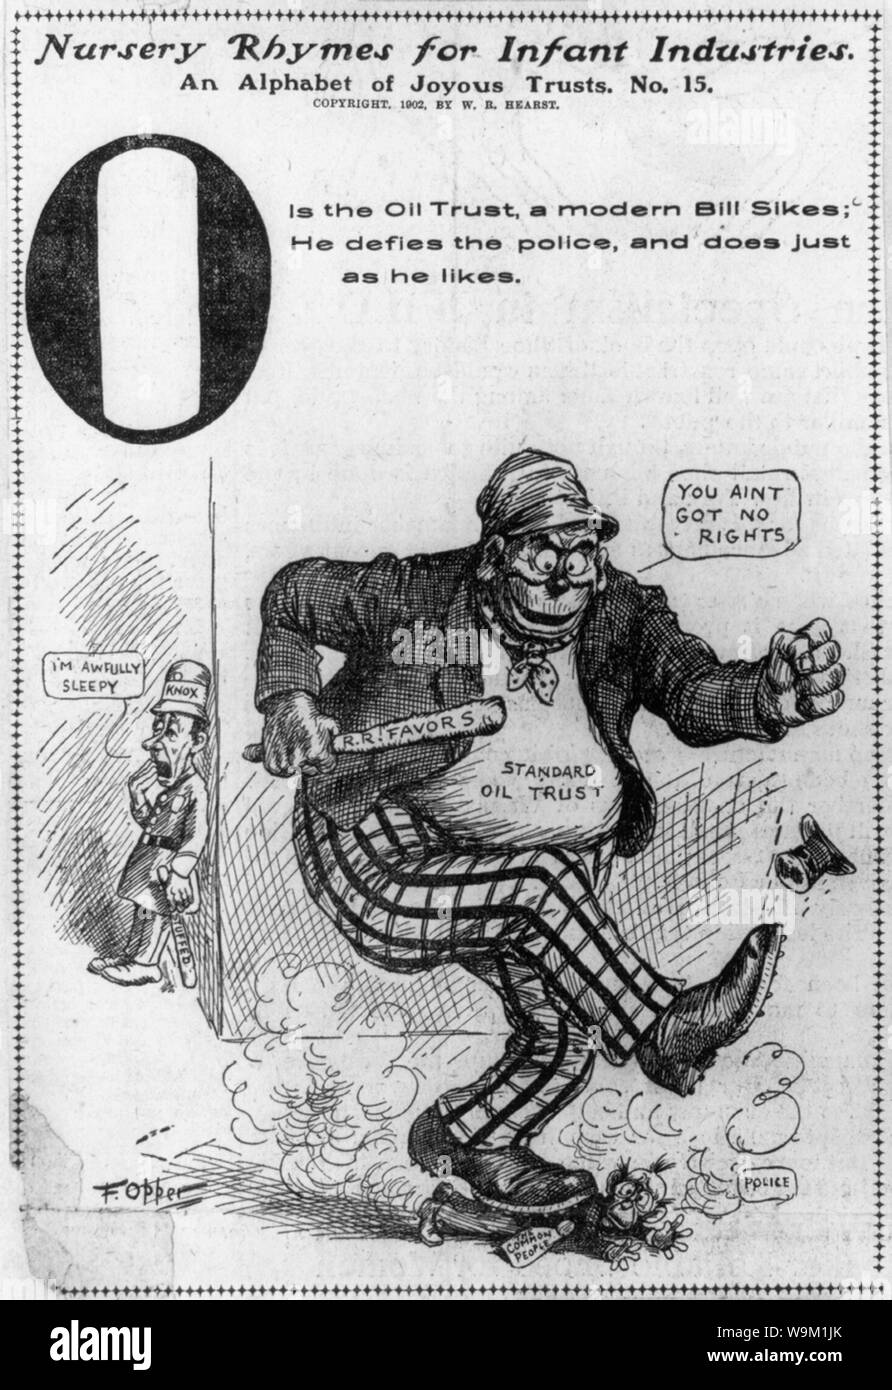 Anti-trust cartoons]: Nursery Rhymes for Infant Industries, No. 15: 'O' is the Oil Trust, a modern Bill Sikes; he defies the police, and does just as he likes Stock Photo